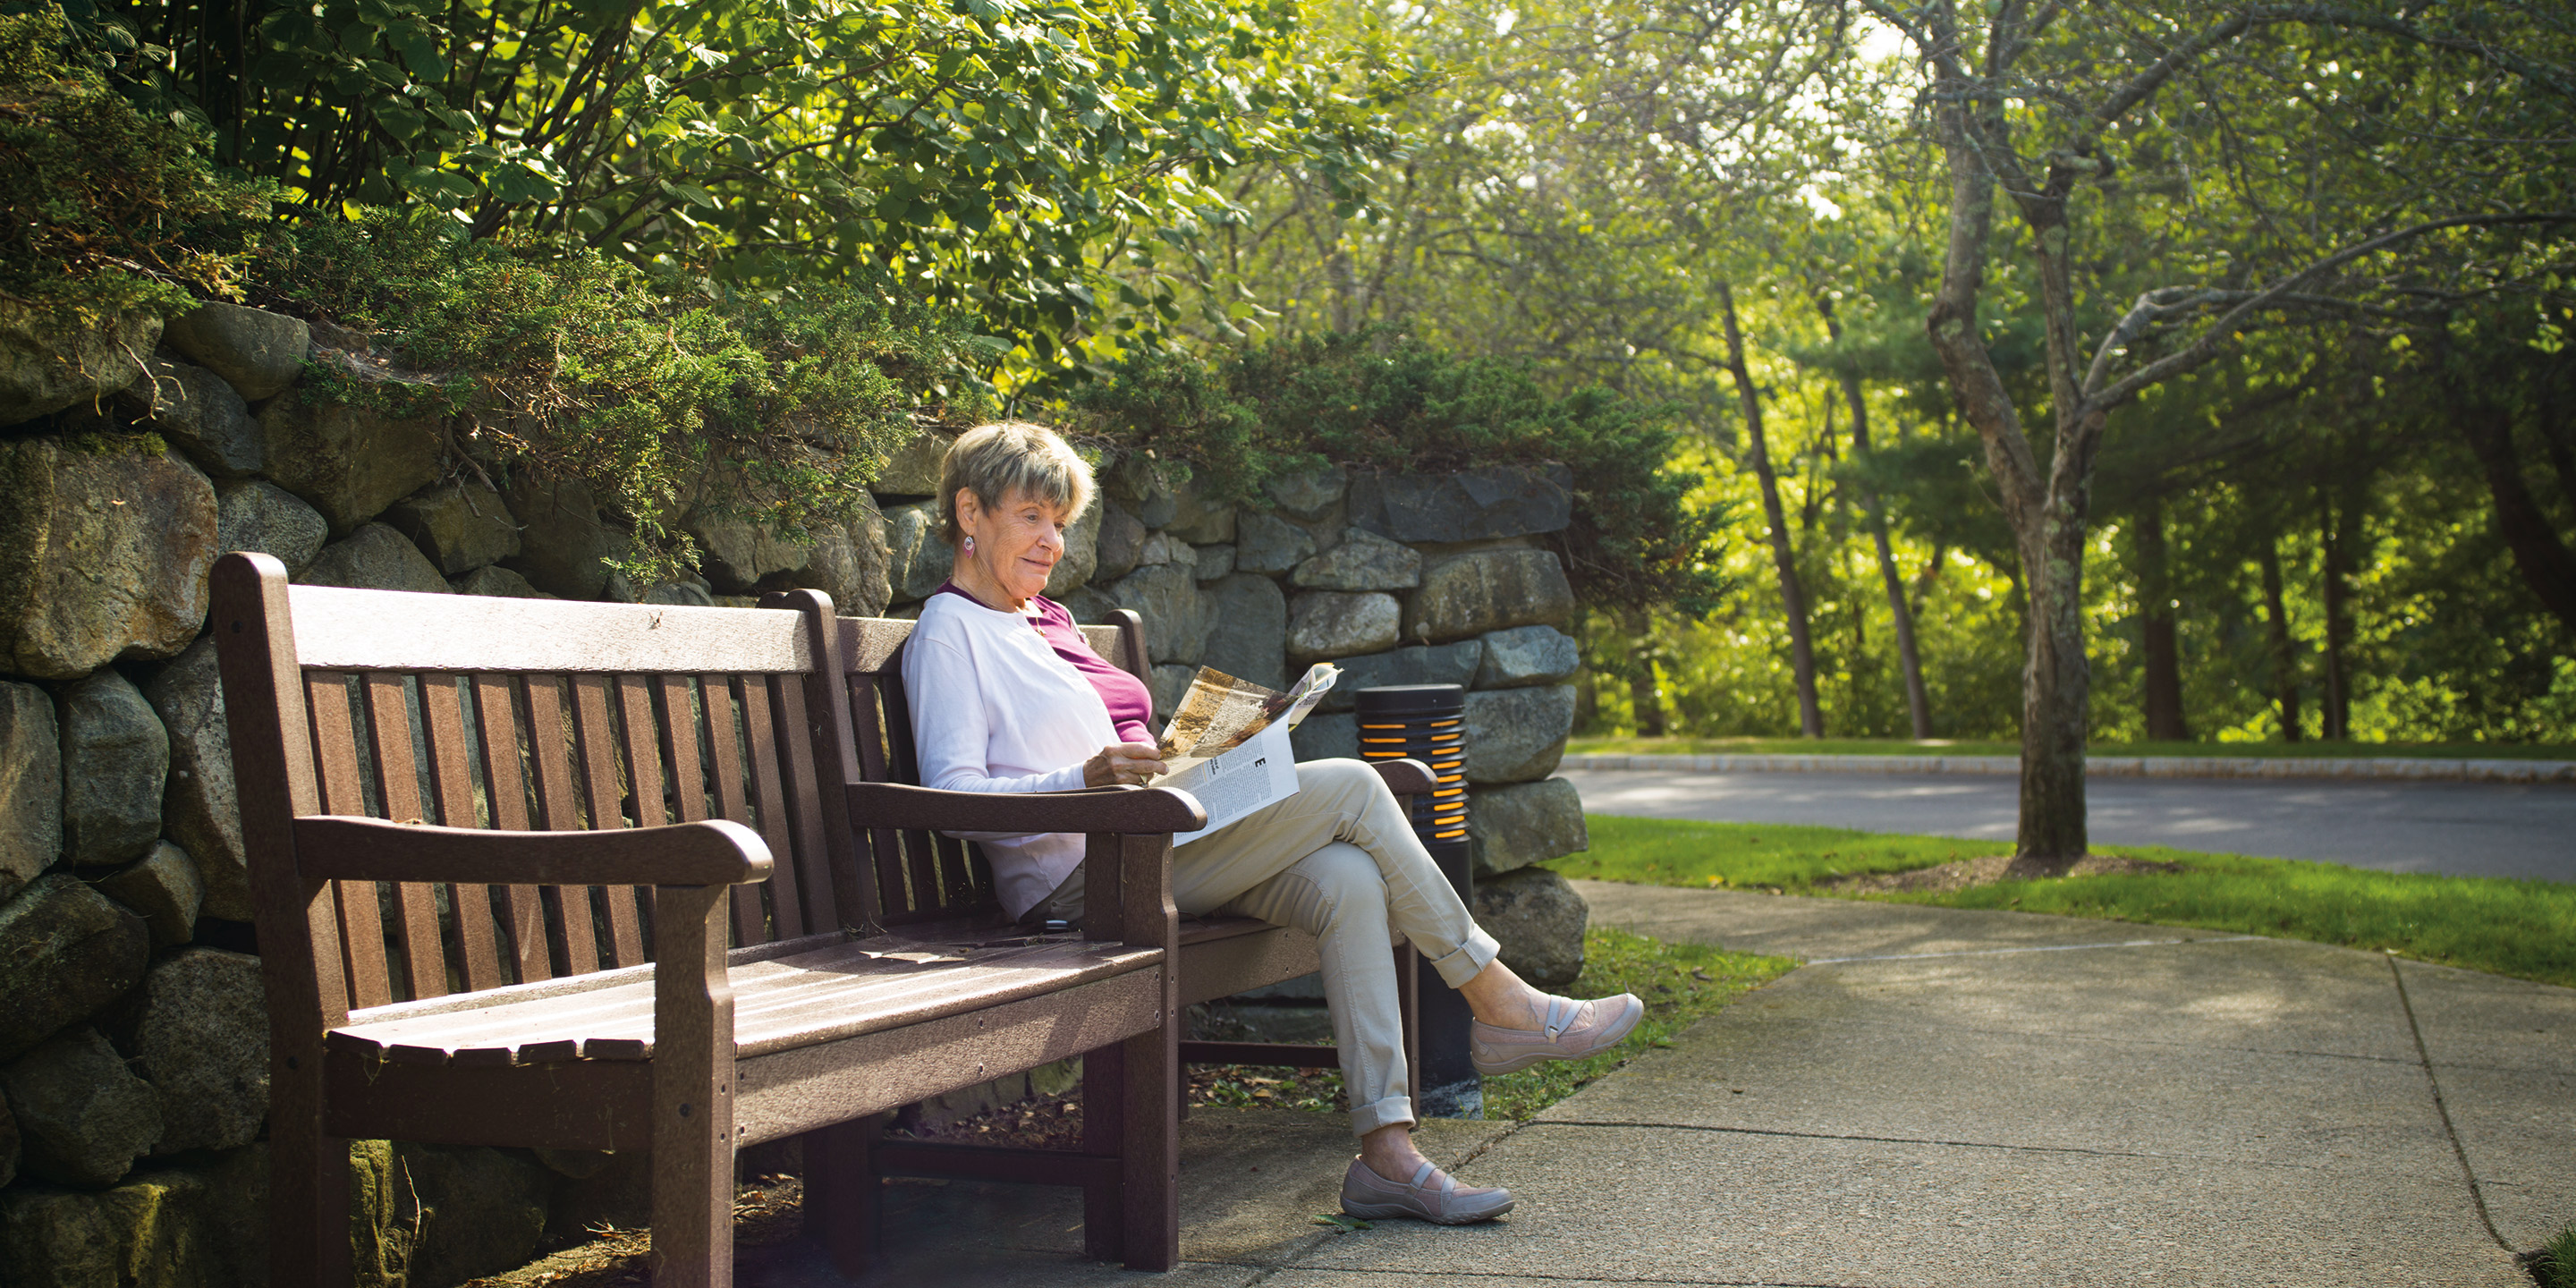 A female sits on a bench outside and reads